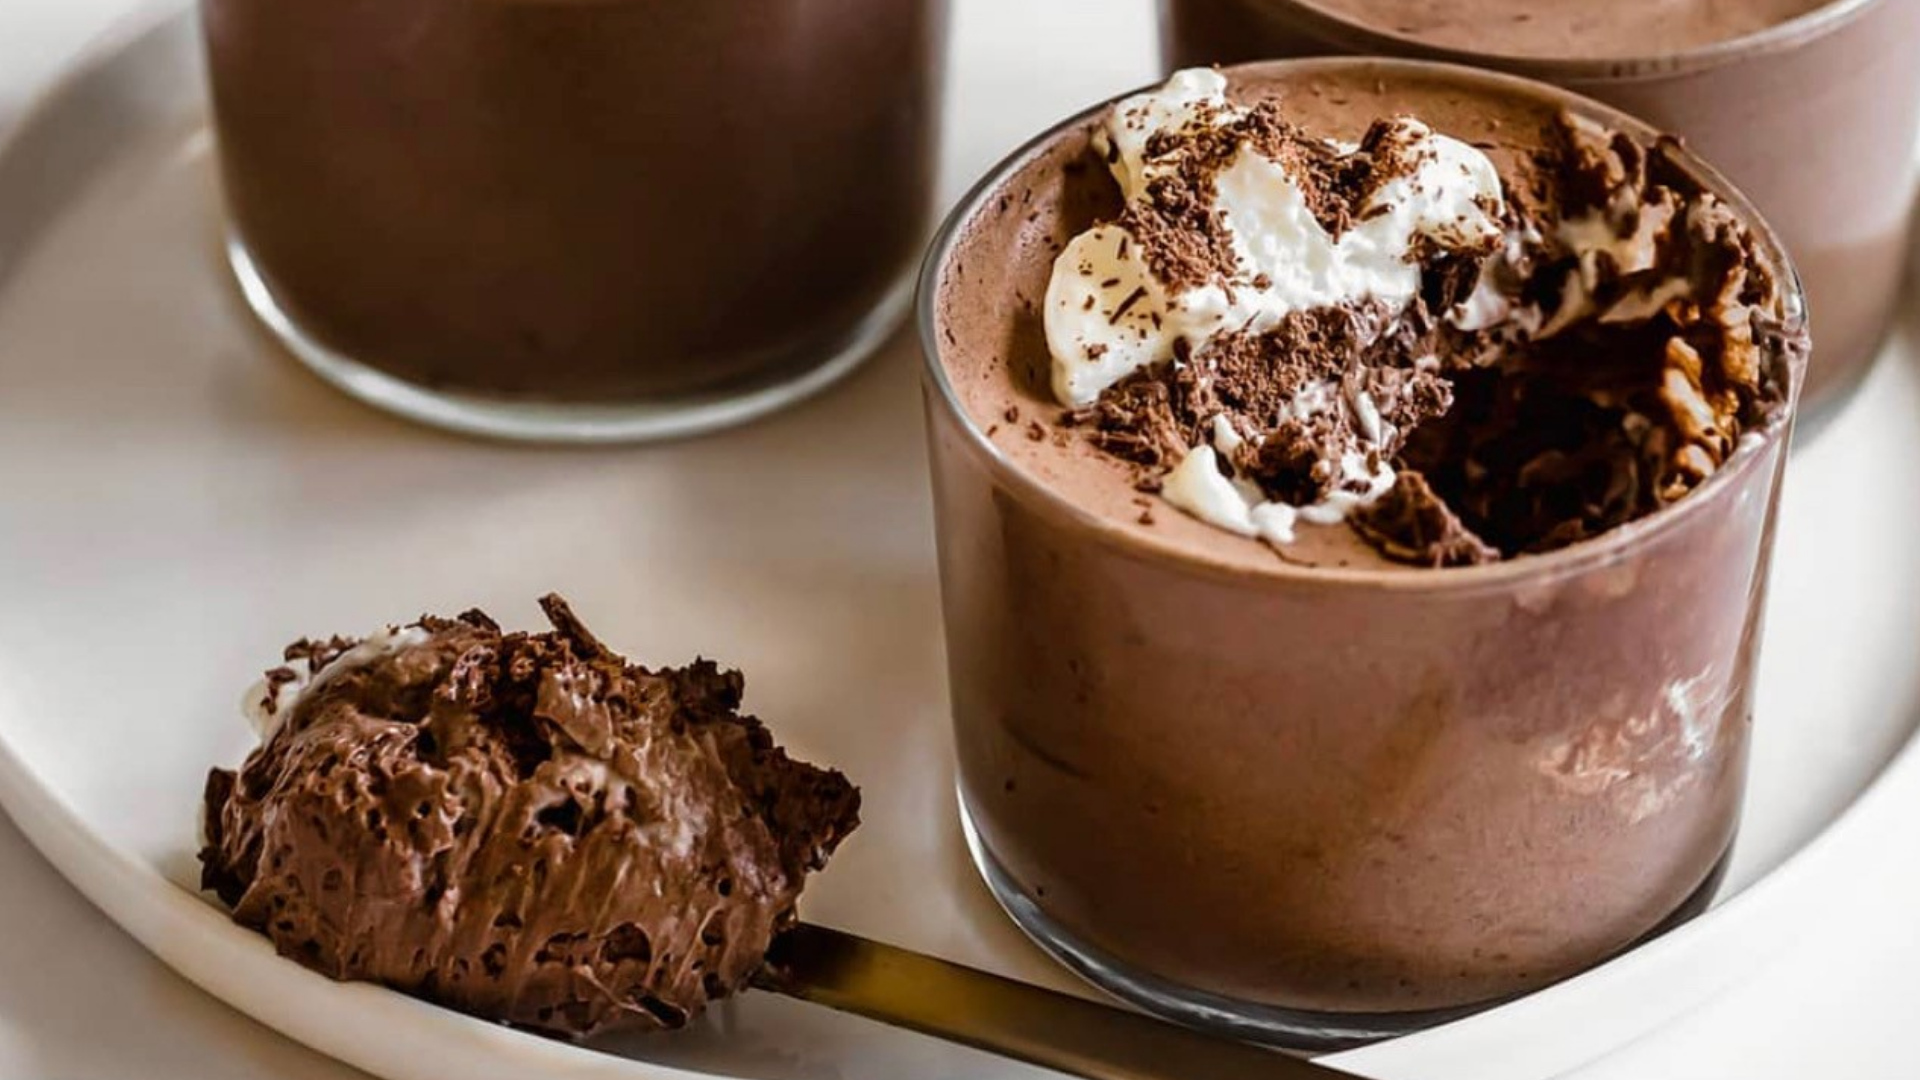 Light, fluffy, creamy and rich! You're going to love this simple chocolate mousse.